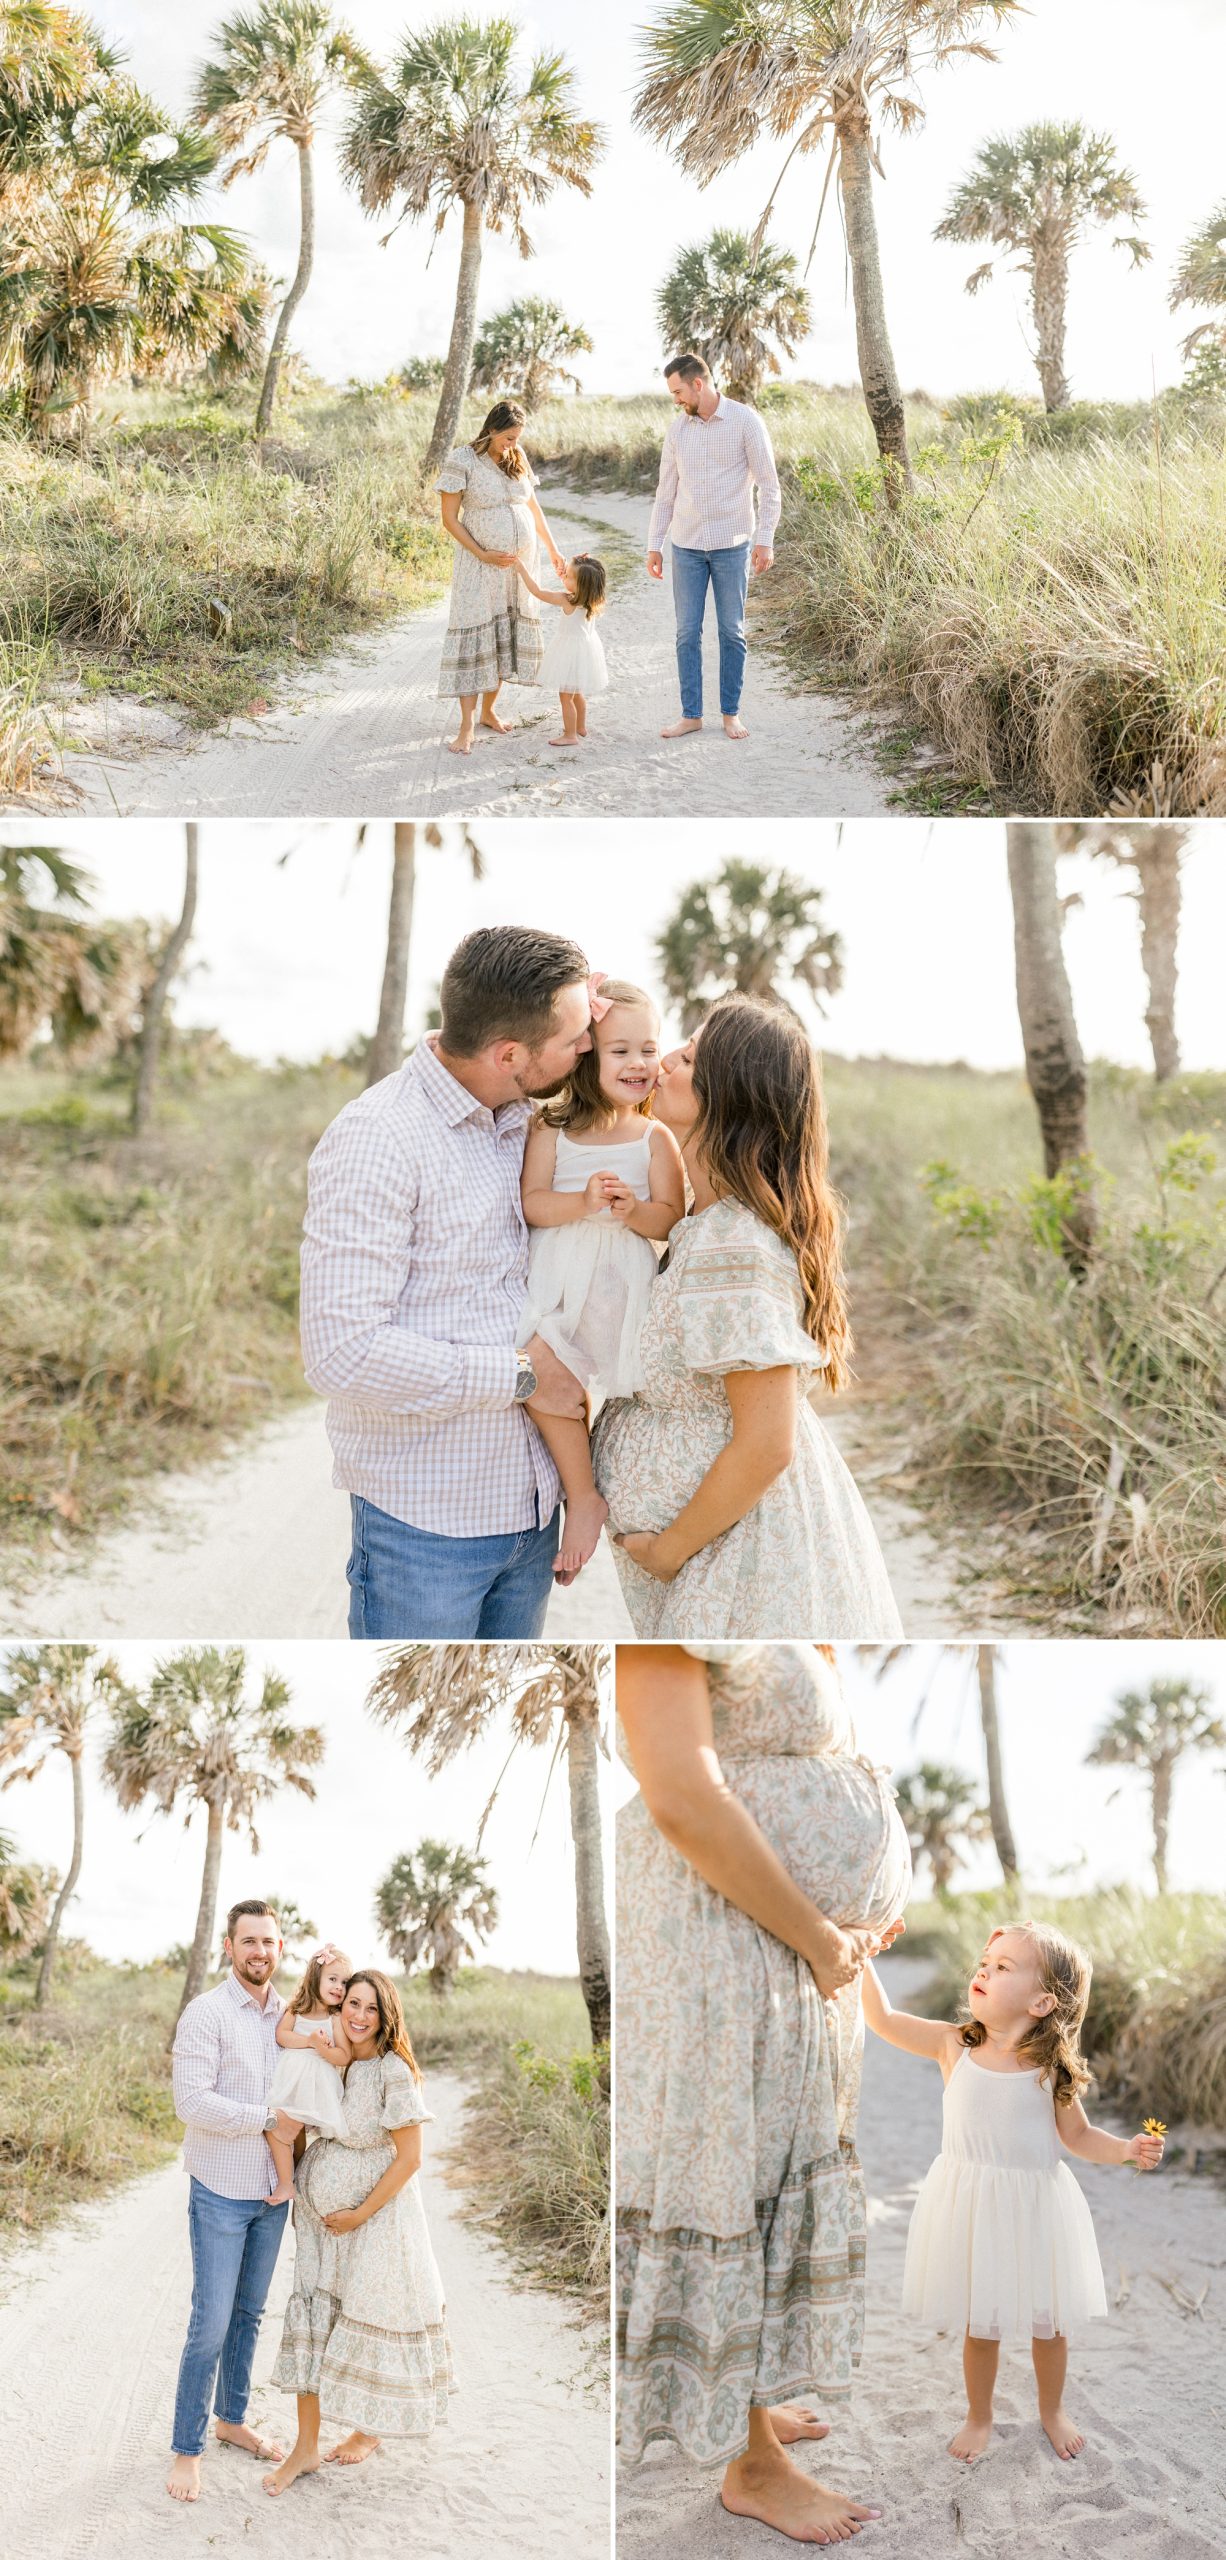 Maternity photos on a palm tree lined pathway at Fort De Soto beach by South Tampa Maternity Photographer